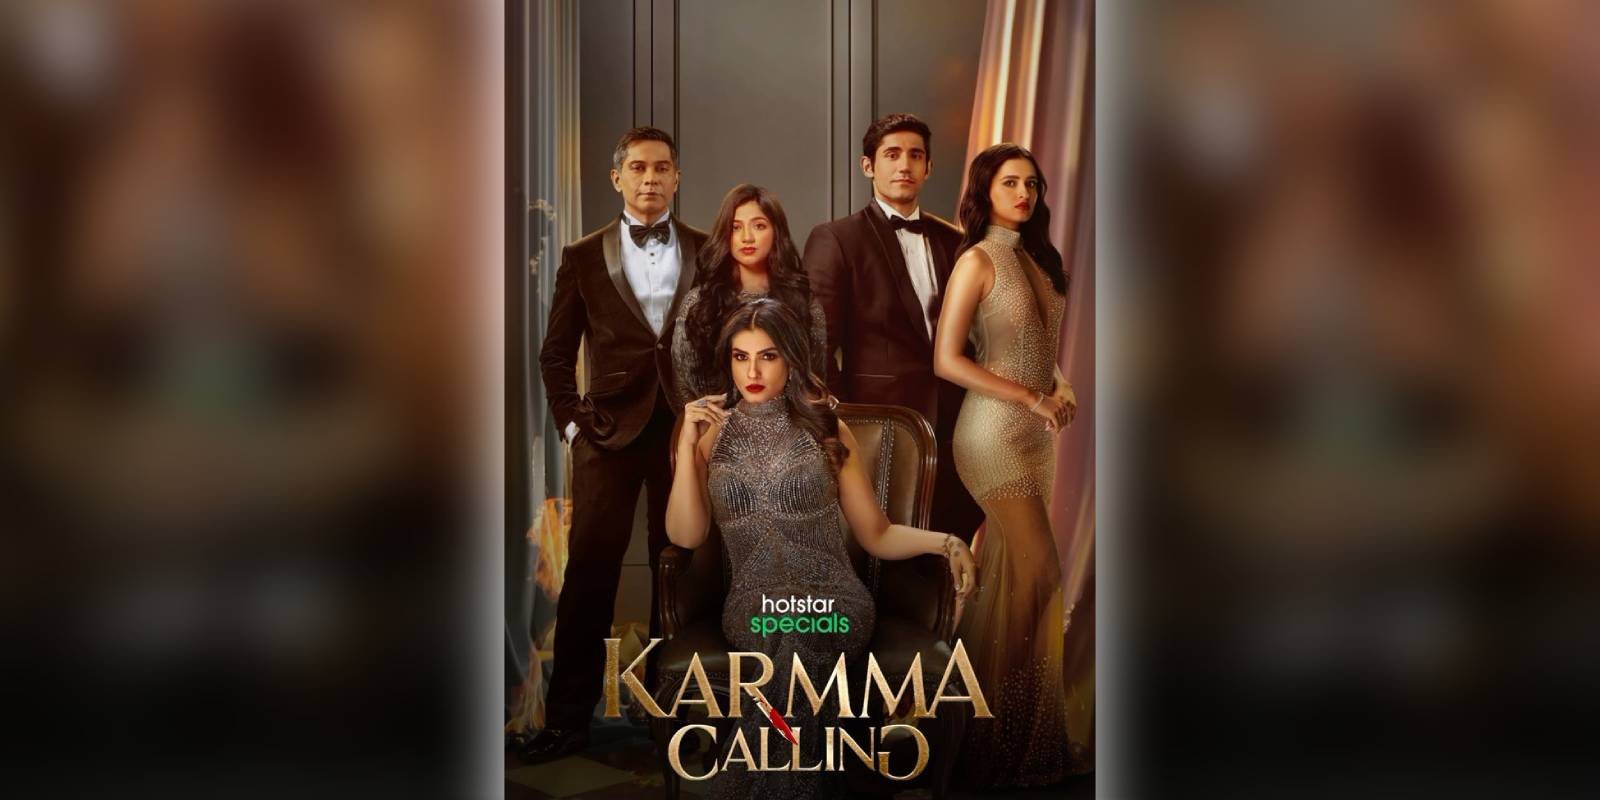 A poster of the web series Karmma Calling